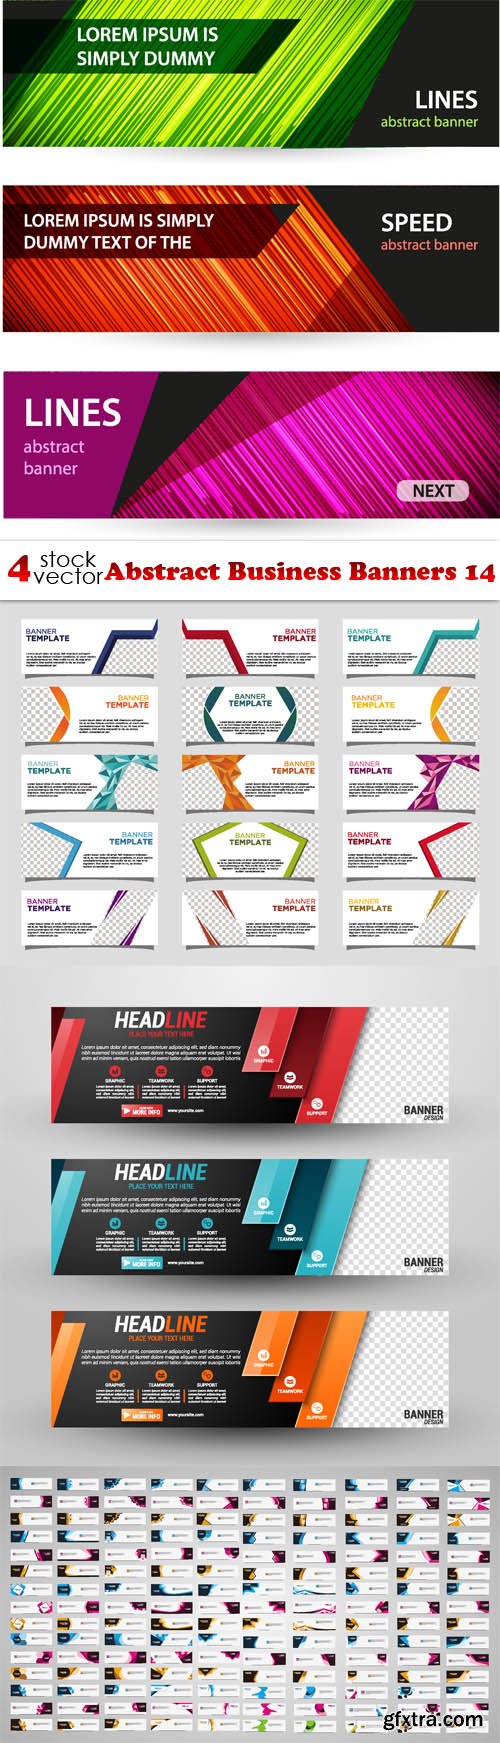 Vectors - Abstract Business Banners 14